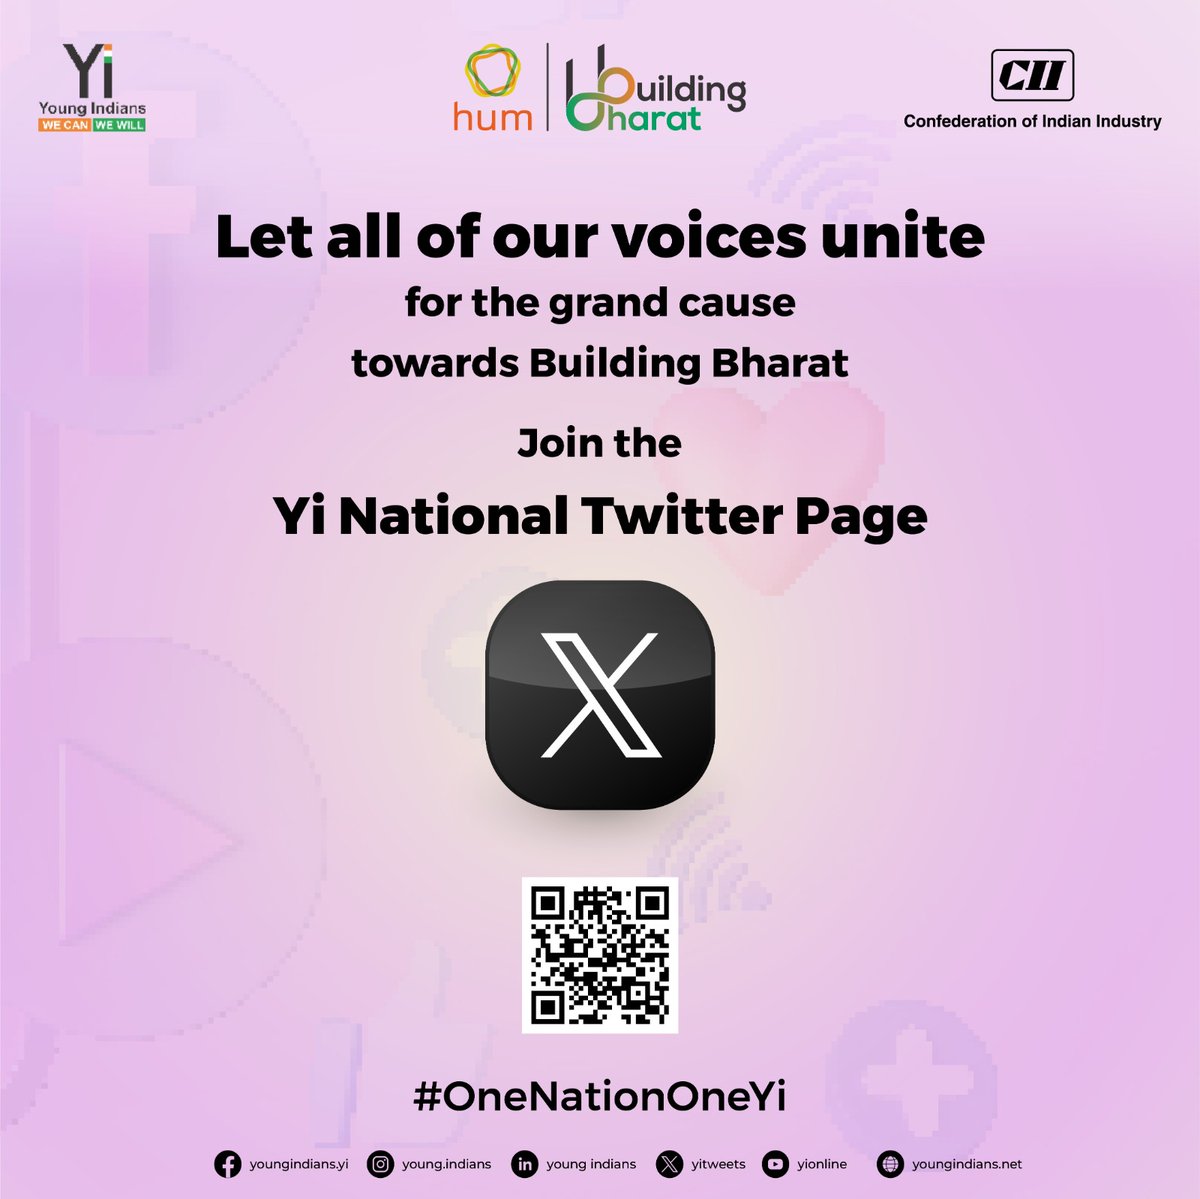 Connect, share, and amplify your voice with fellow Yi members nationwide on the official Yi Twitter handle. Let's build Bharat one tweet at a time!
#Yi #Cii #YoungIndians #YiNational #newLeadership #NationBuilding #YouthLeadership #ToGetherWeAreOne #buildingbharat #HUM